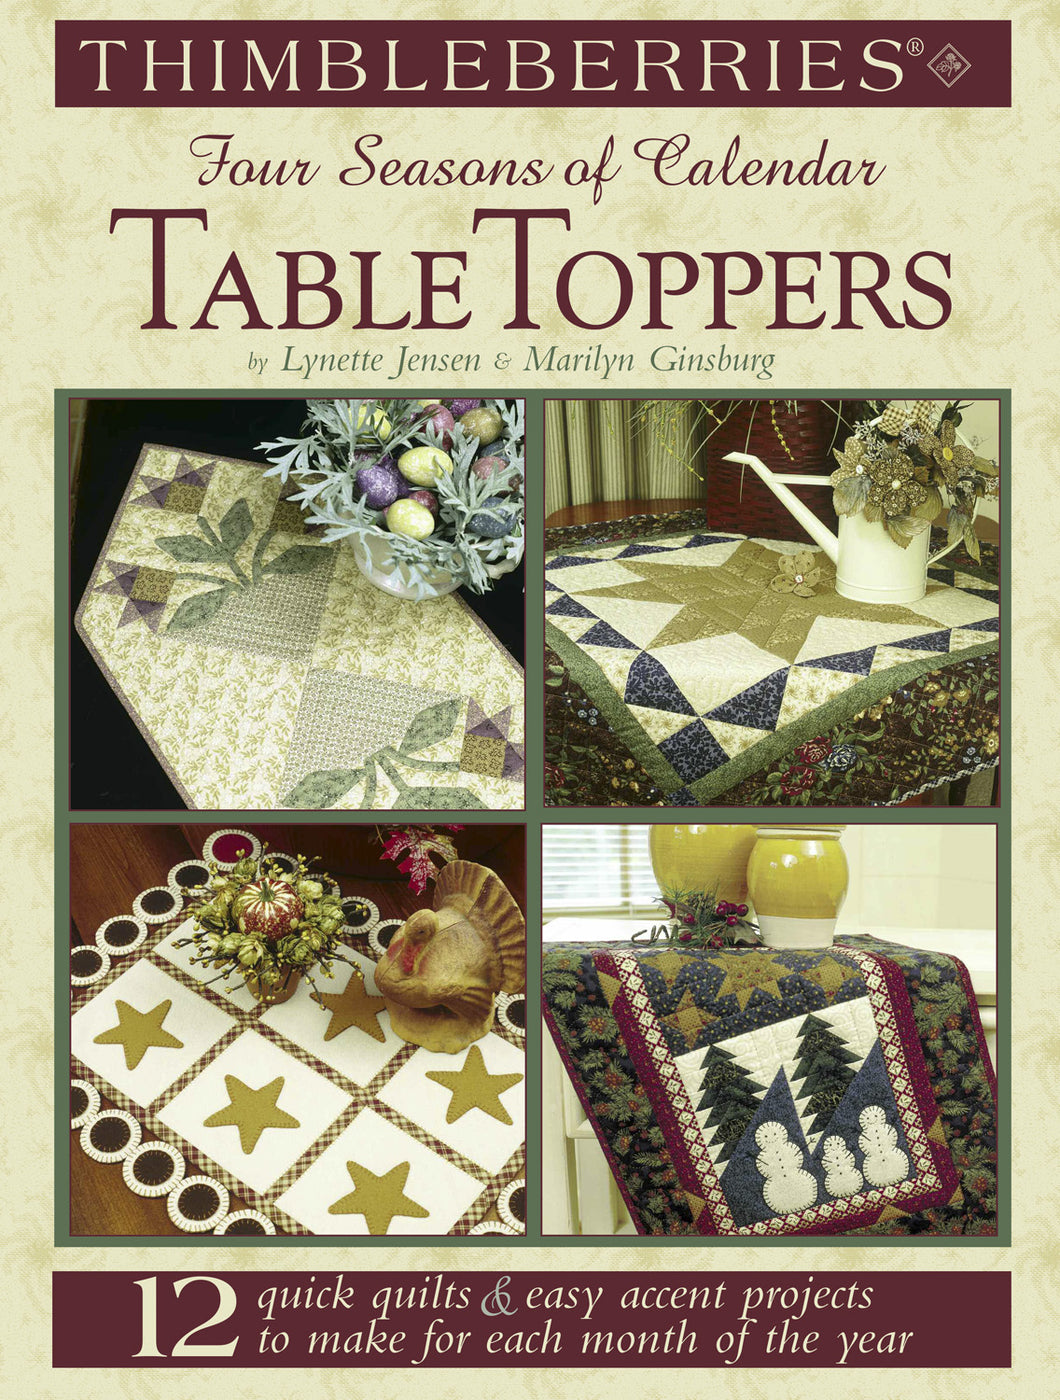 Thimbleberries® Four Seasons of Calendar Table Toppers